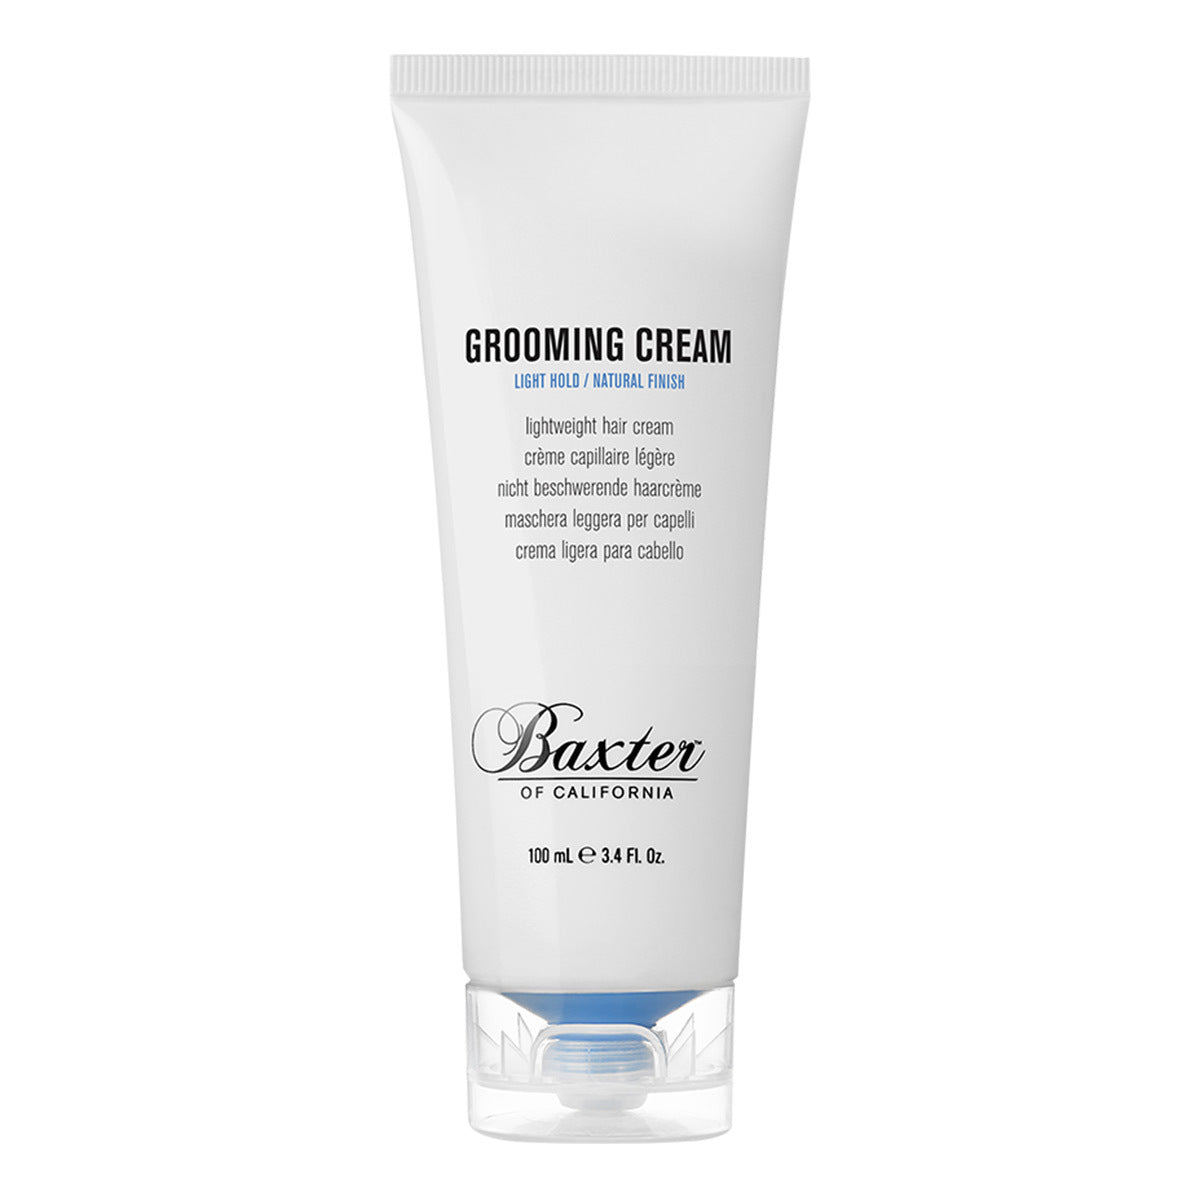 Primary image of Grooming Cream